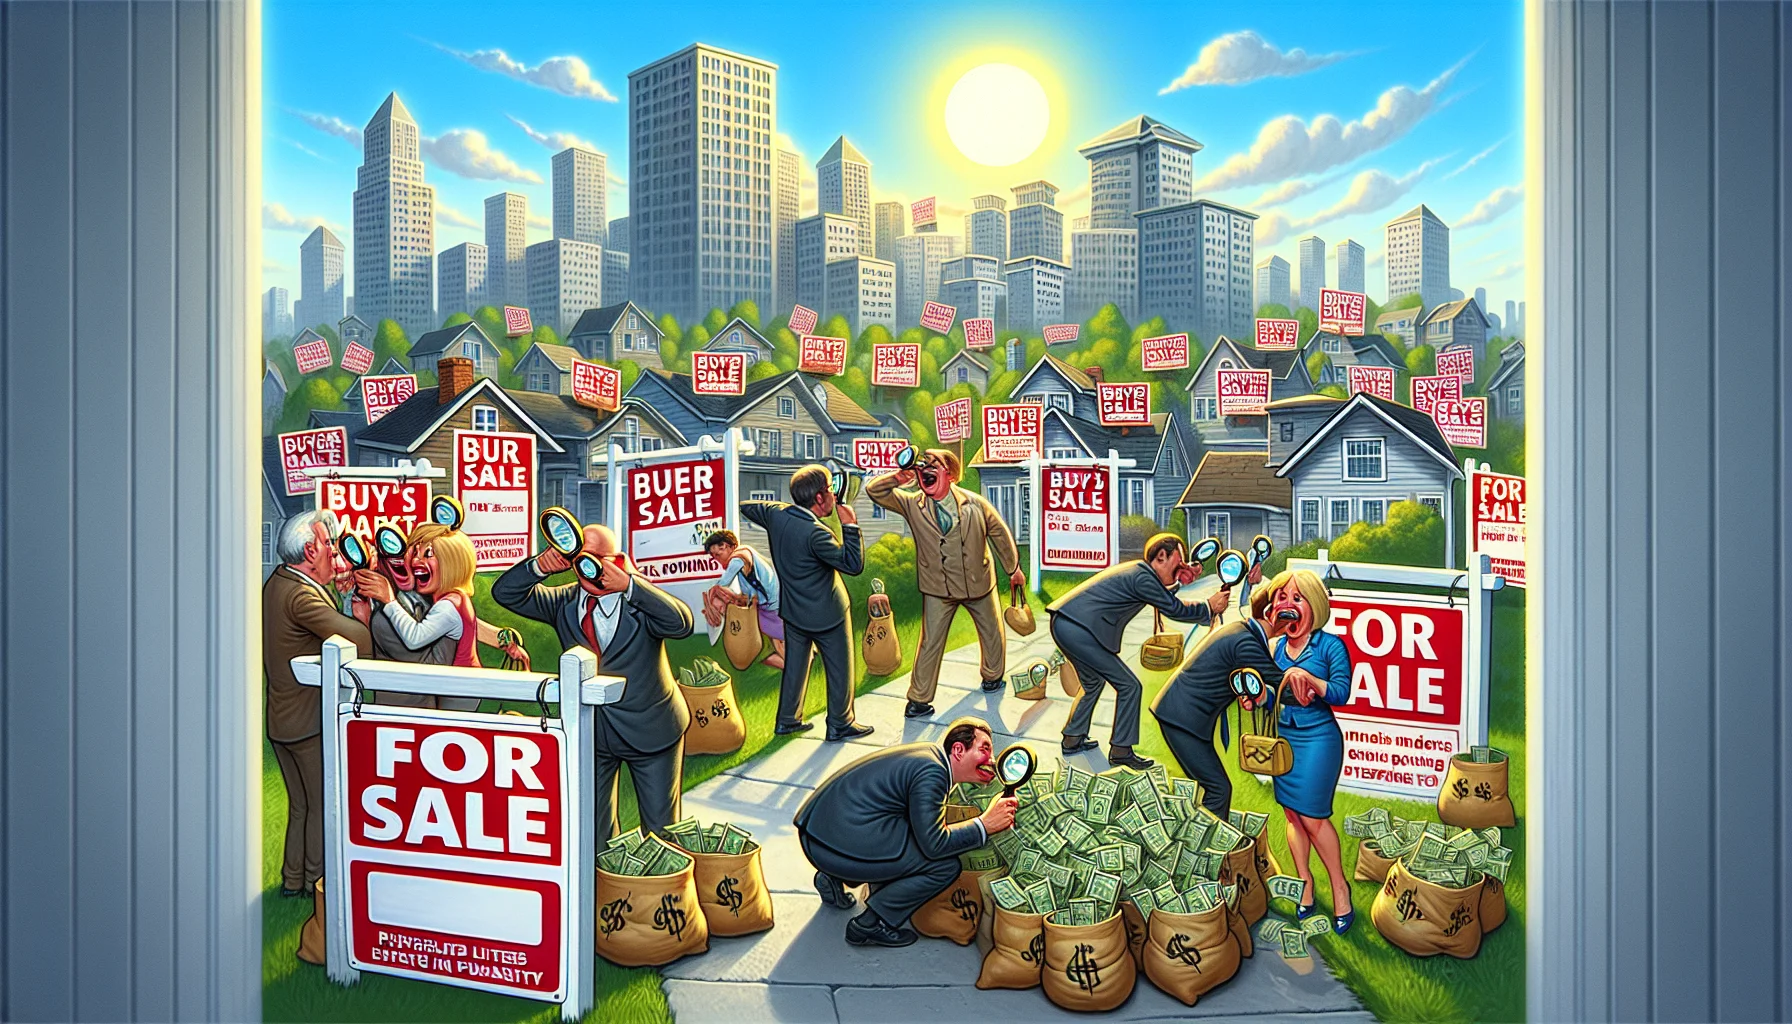 Imagine a humorous and realistic situation that epitomizes a buyer's market in the real estate industry. Picture a cityscape with properties donning 'for sale' signs, with prices plummeting so dramatically they resemble a downhill ski slope. Buyers, composed of men and women from all races, are jovially gathering, with overflowing bags of money and magnifying glasses to peruse the tiny print of property listings. There are signs indicating drastically reduced interest rates, and the sun is shining brightly, symbolizing the perfect scenario for purchasing. All of this is portrayed with a light-hearted, comical touch.